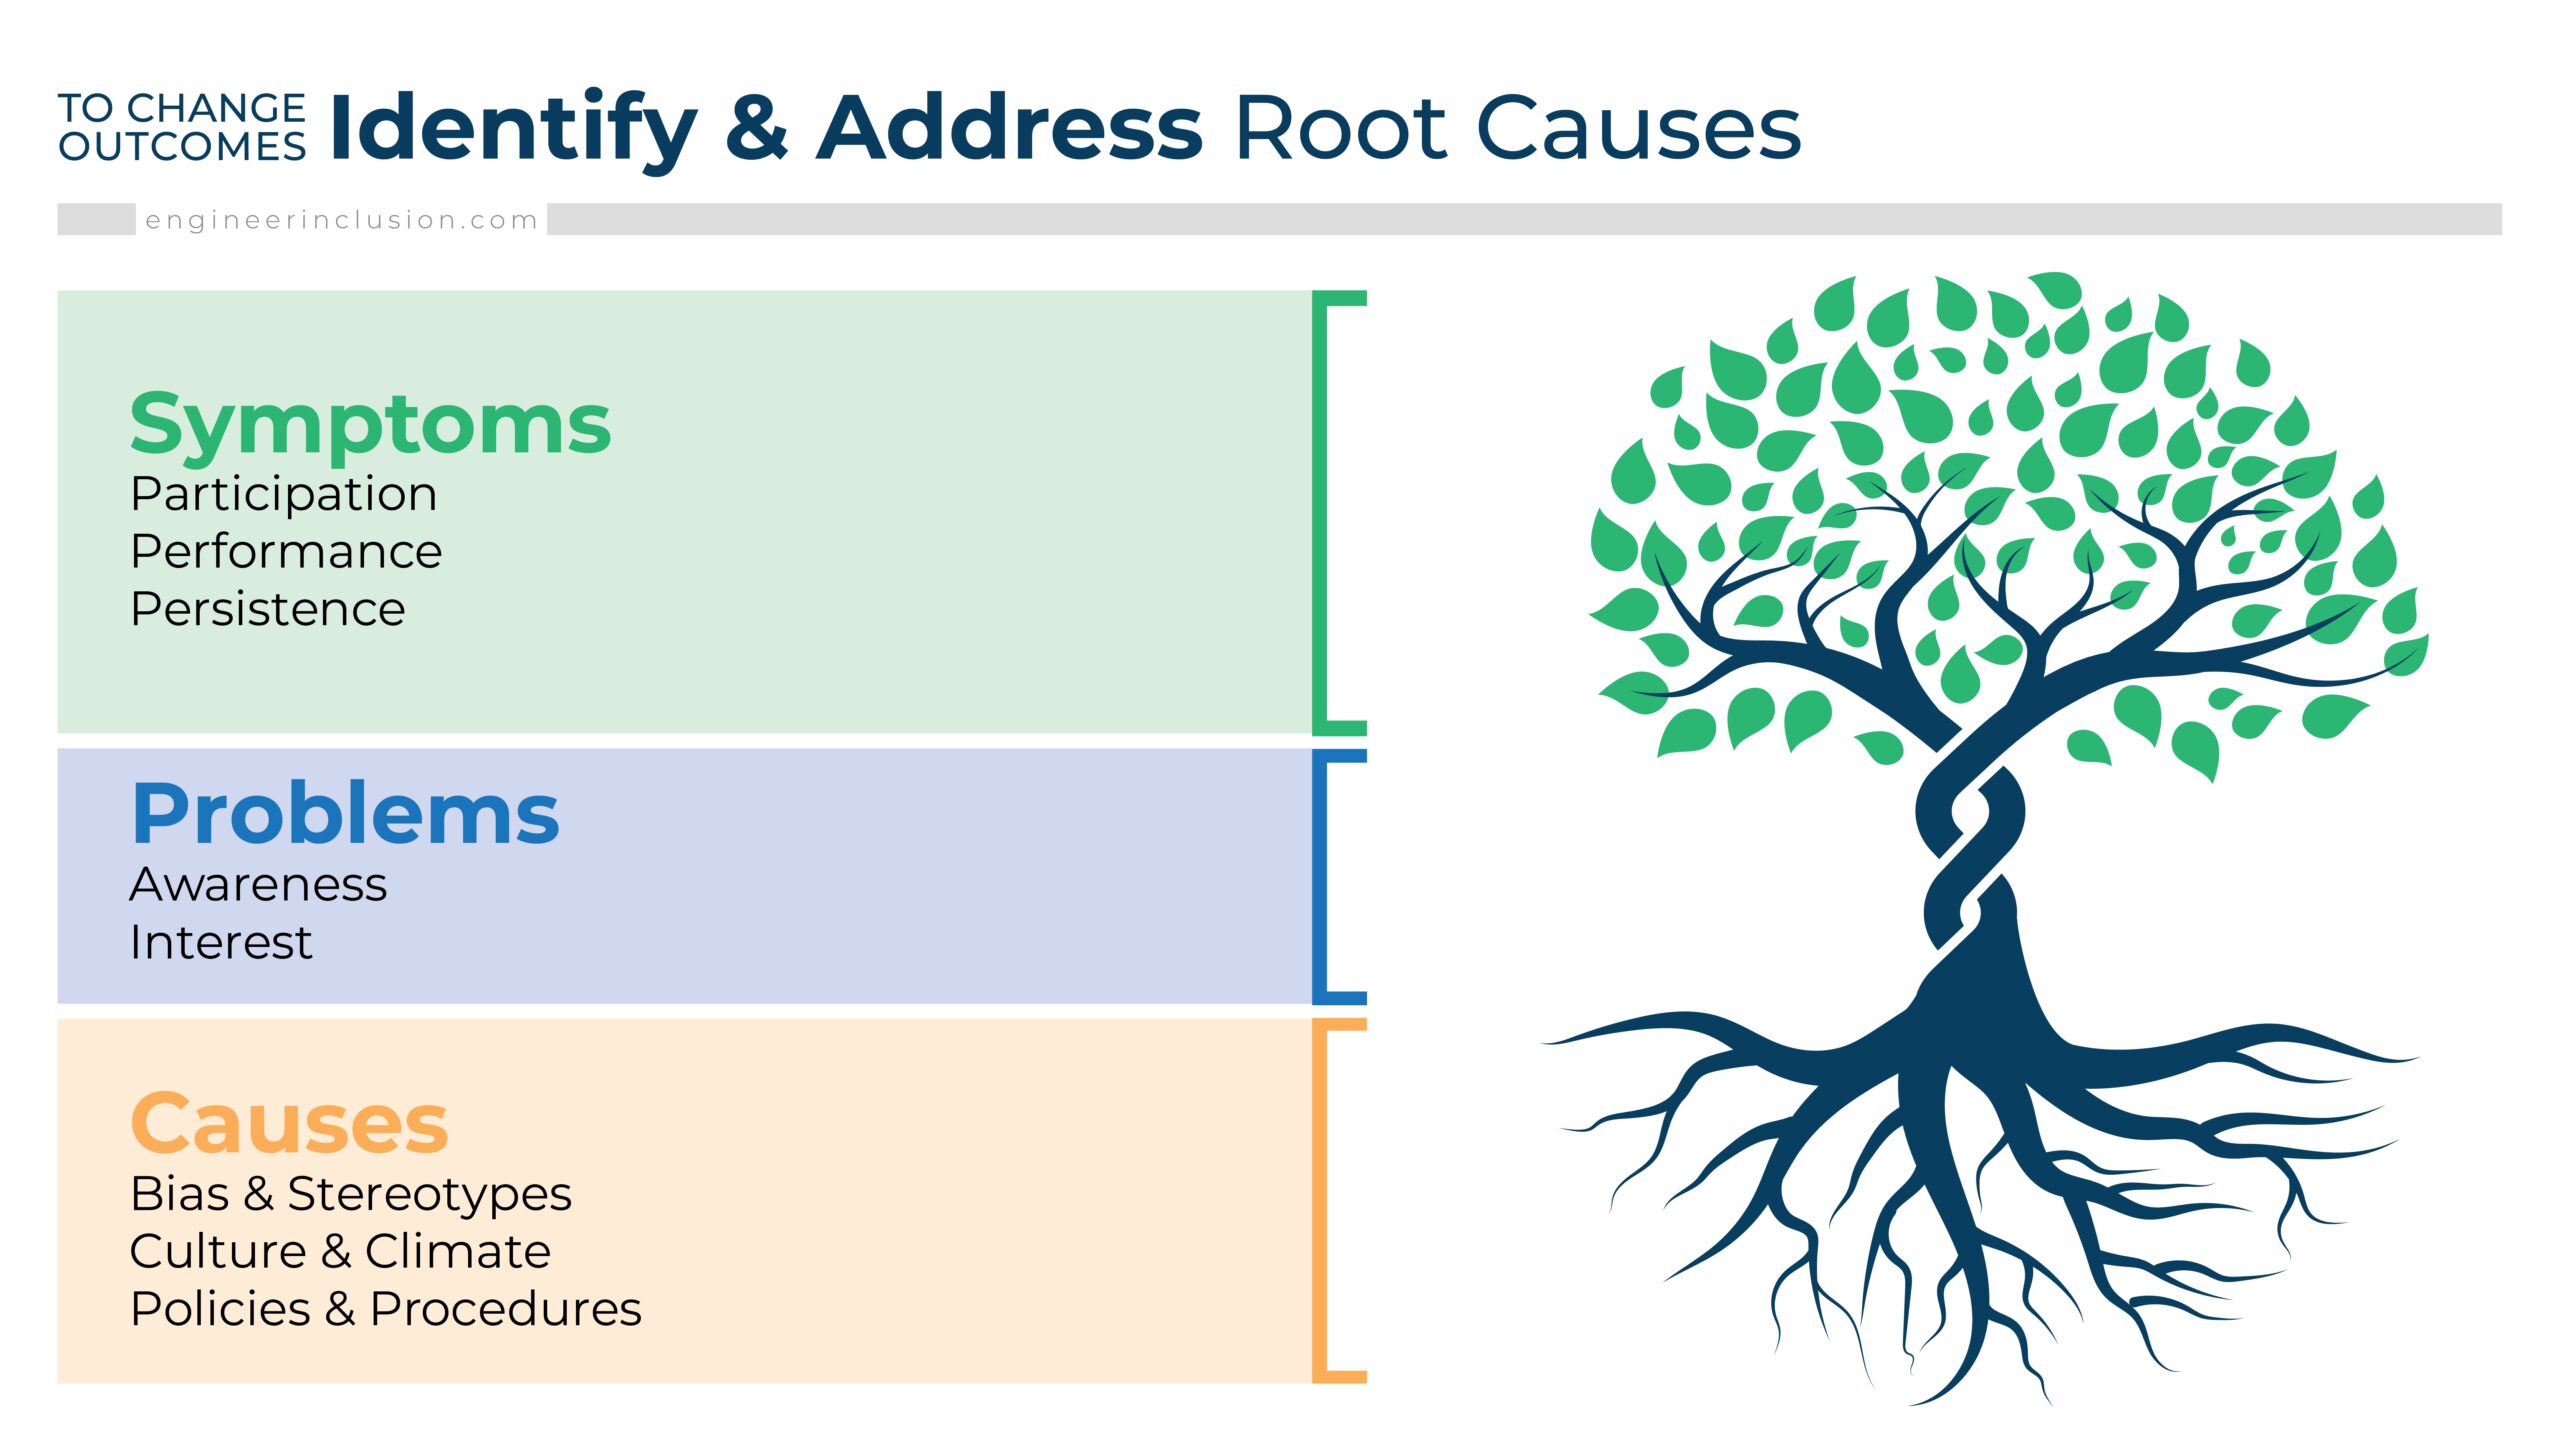 To change outcomes, identify and address root causes